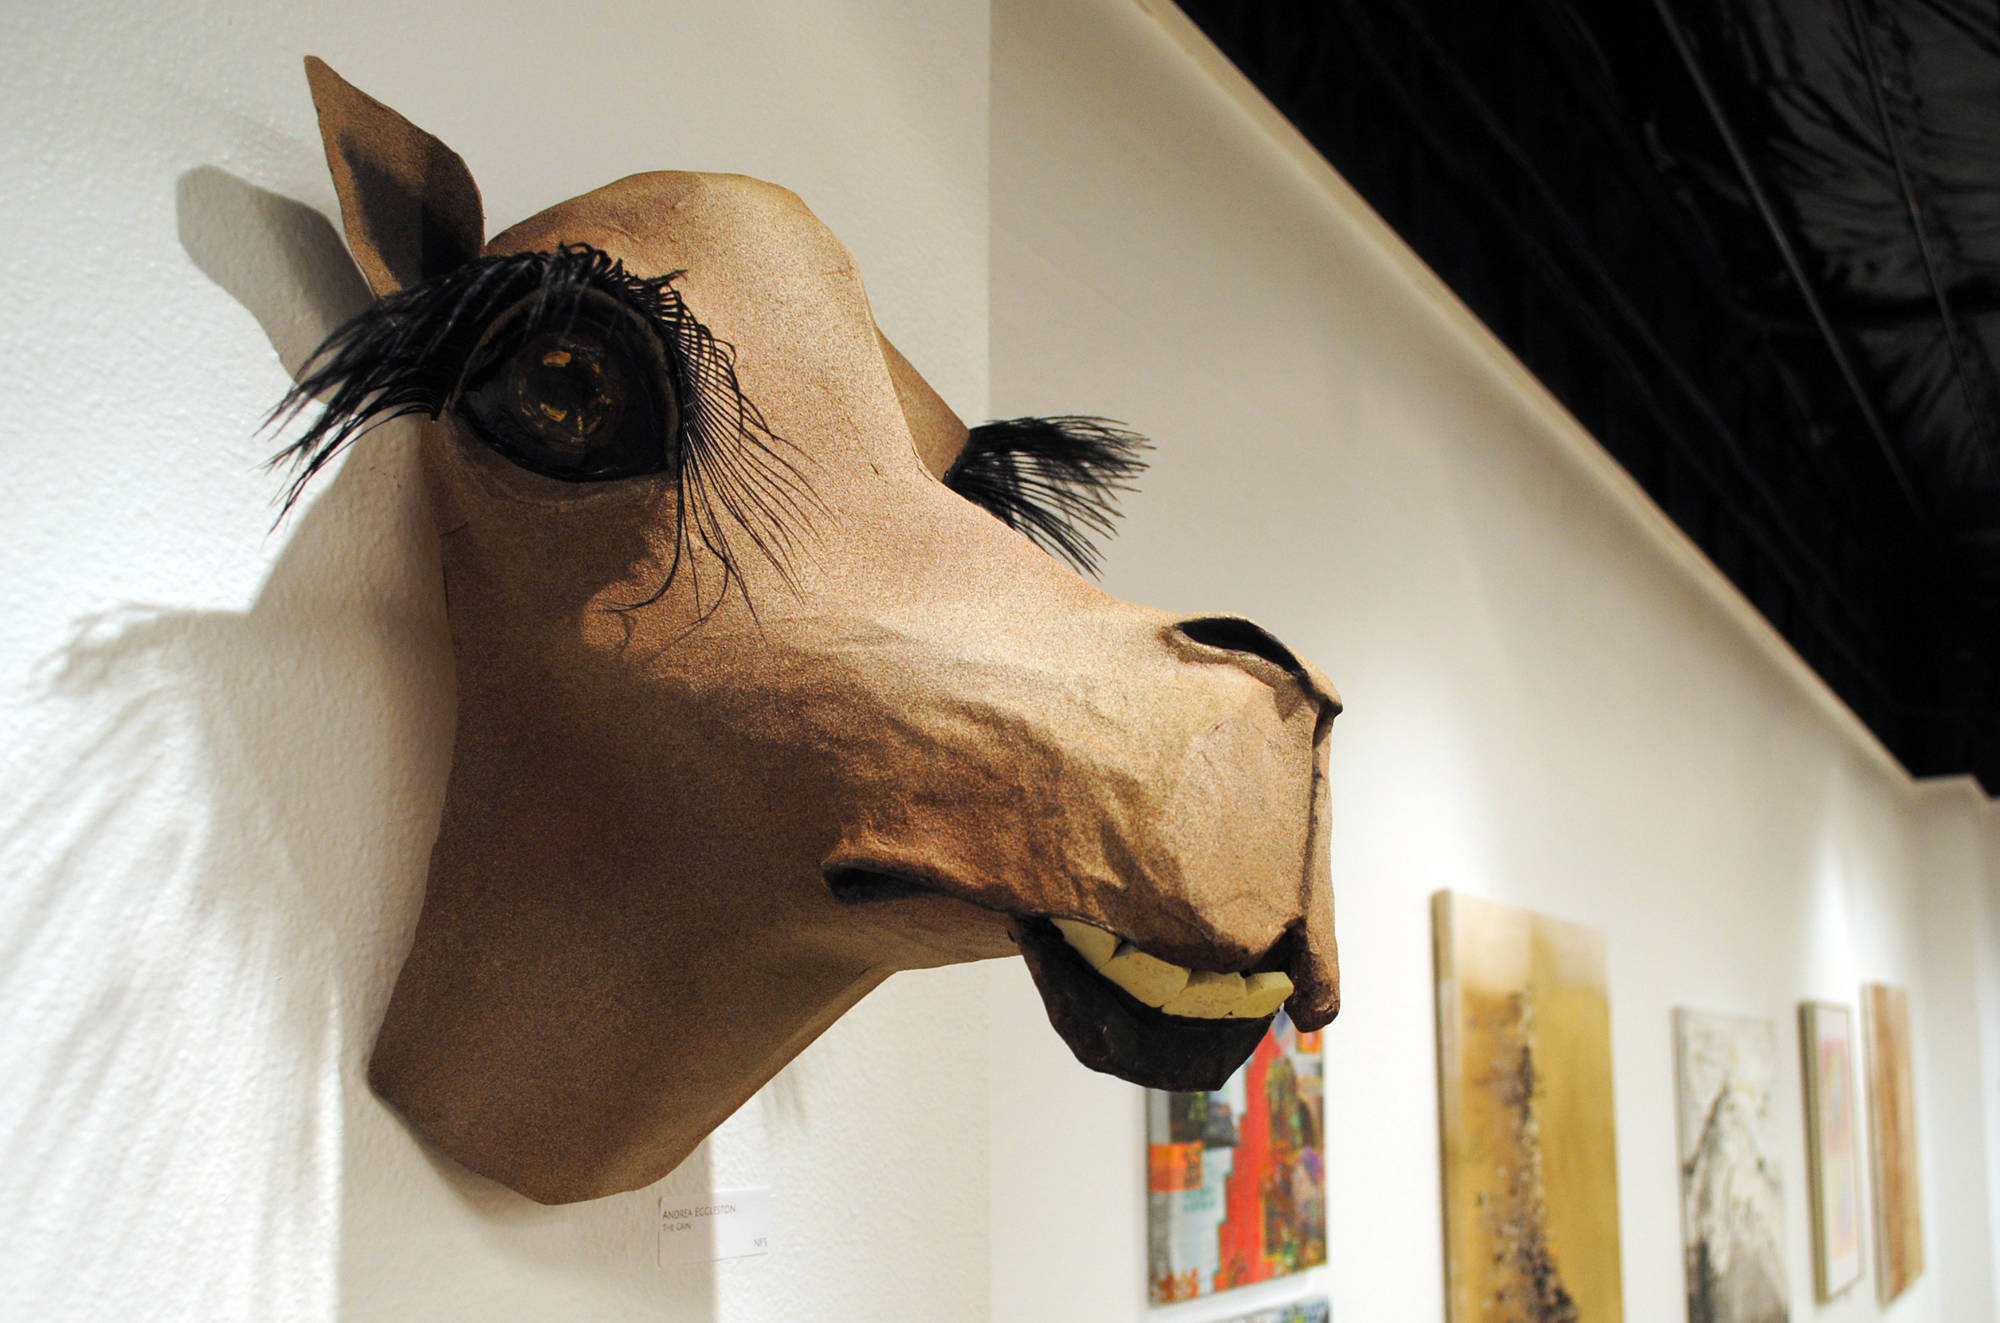 Kenai Peninsula Borough School District teacher Andrea Eggleston’s work ‘The Grin’ hangs at the Kenai Fine Arts Center in Kenai for the January exhibit which features art from teachers across the school district. (Photo by Kat Sorensen/Peninsula Clarion)